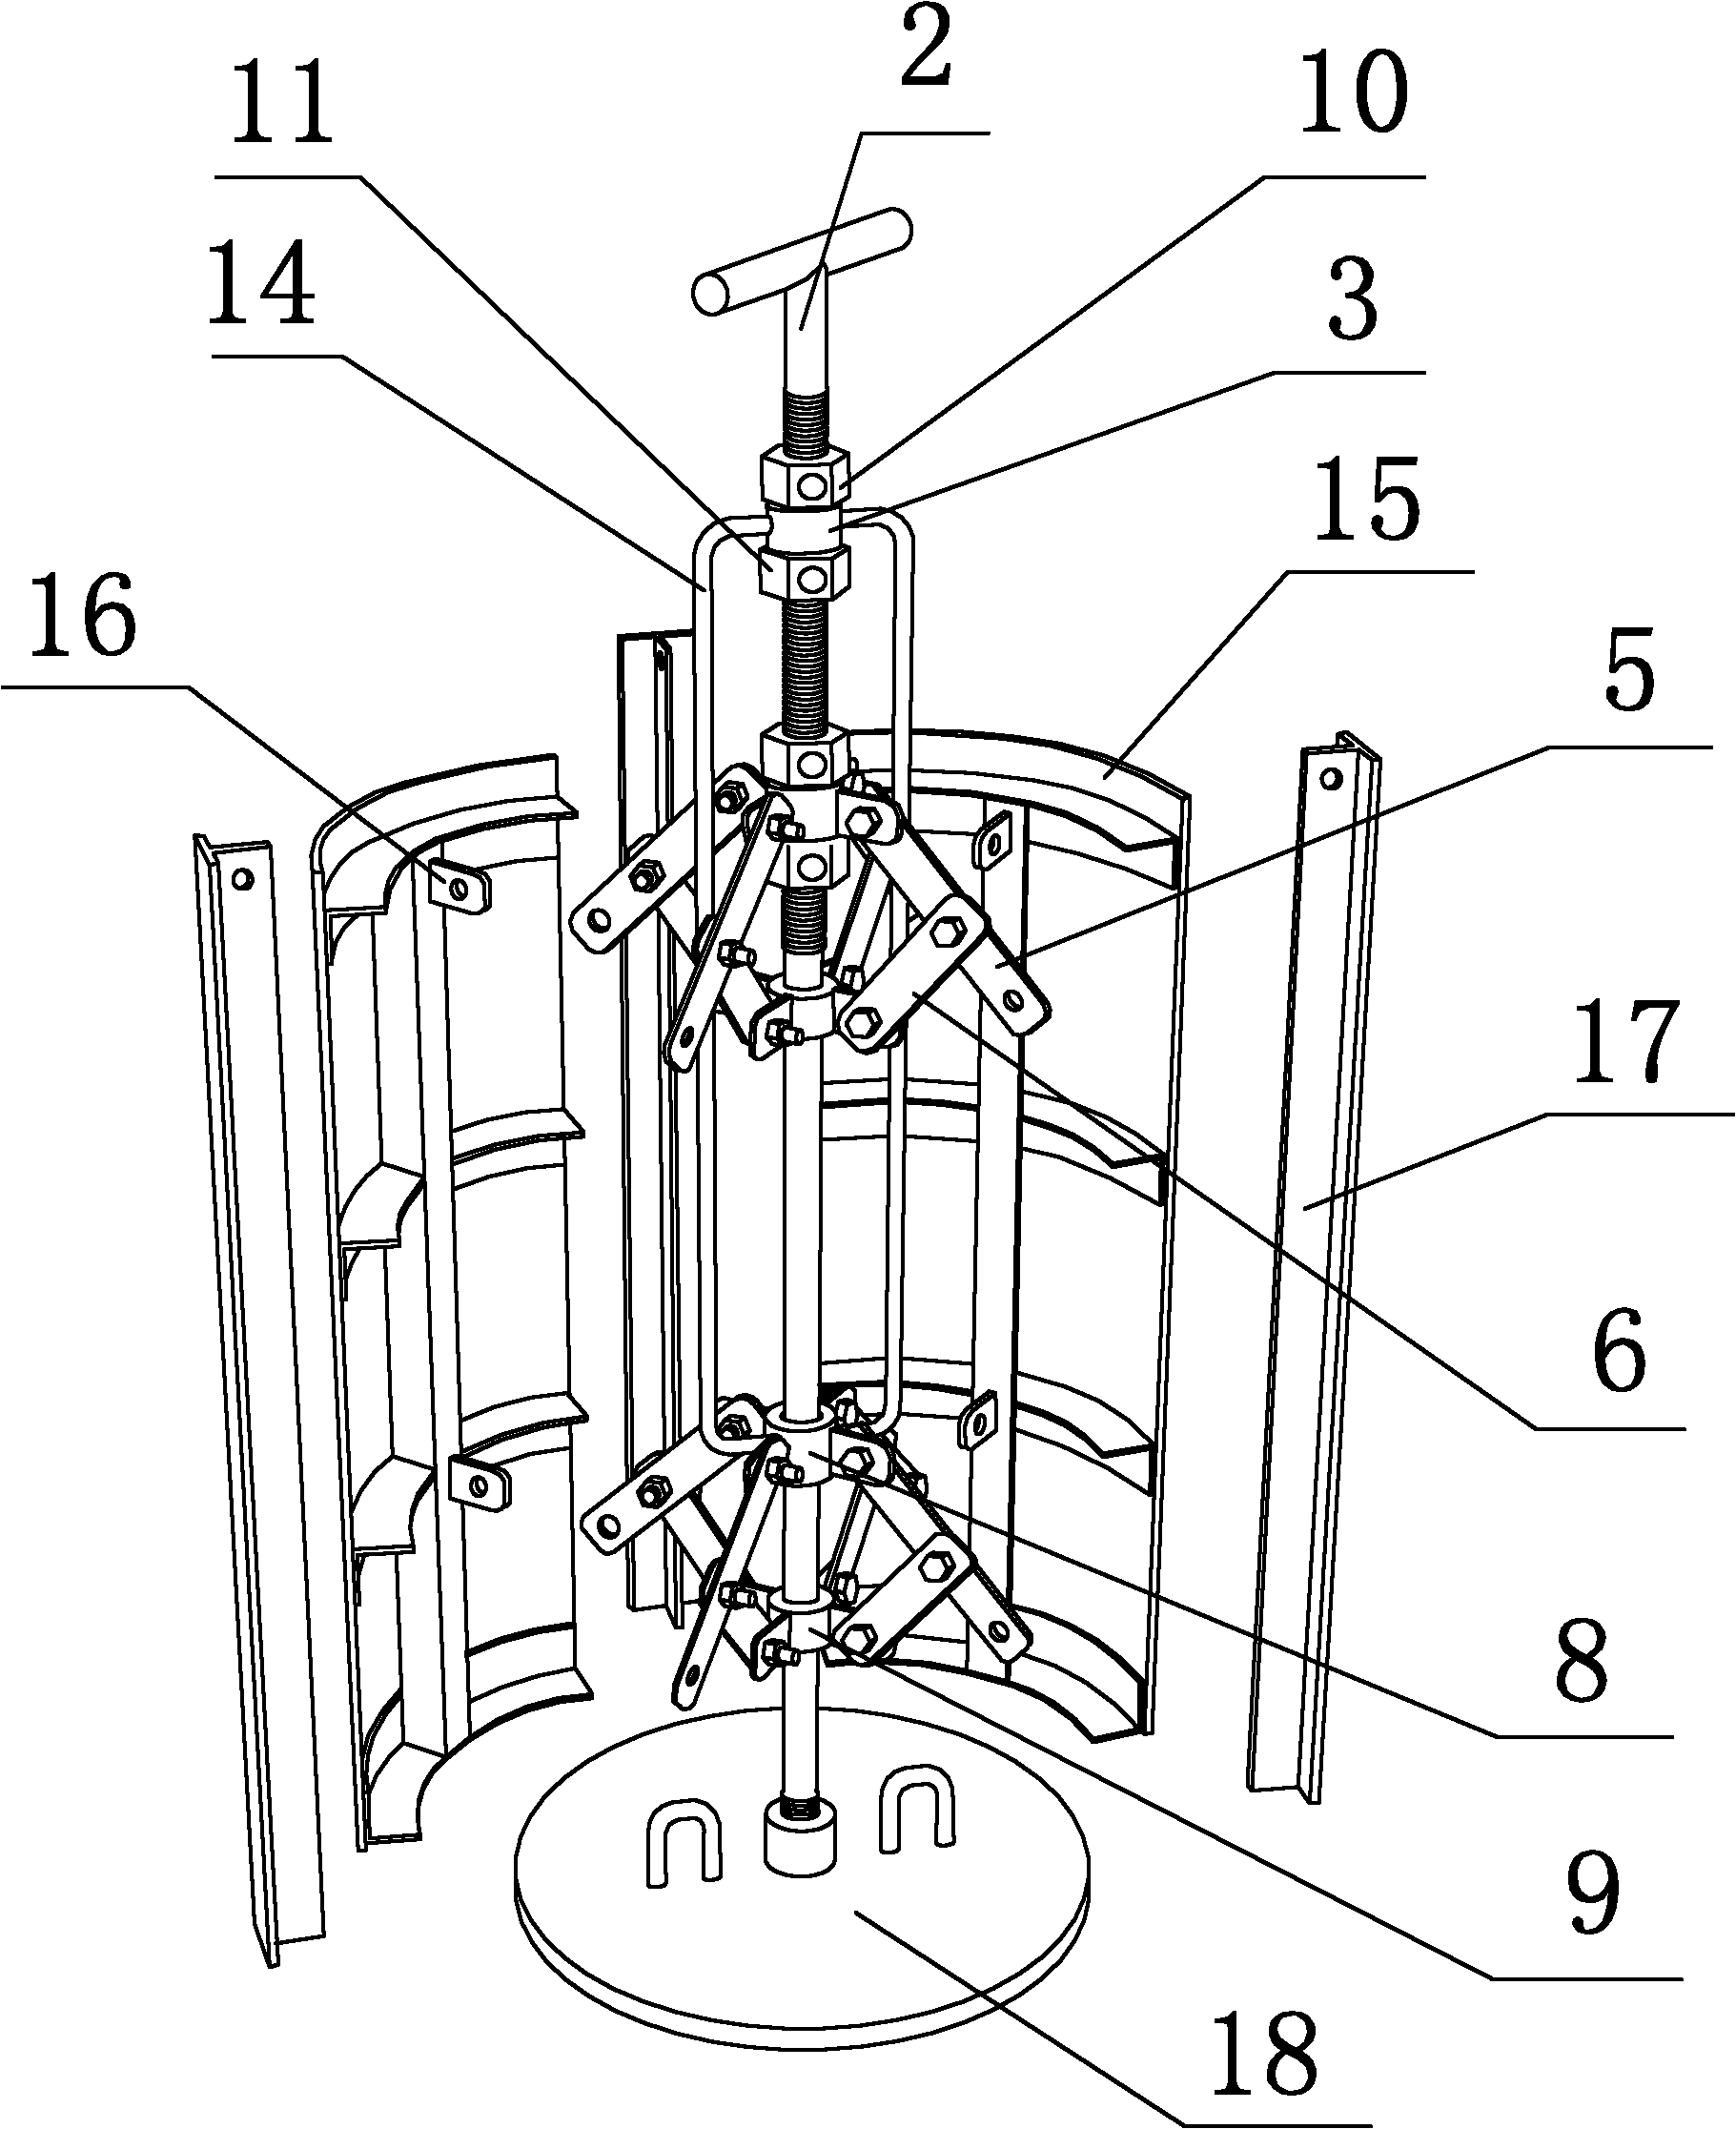 Construction method for circular foundation bolt hole reserved for equipment foundation